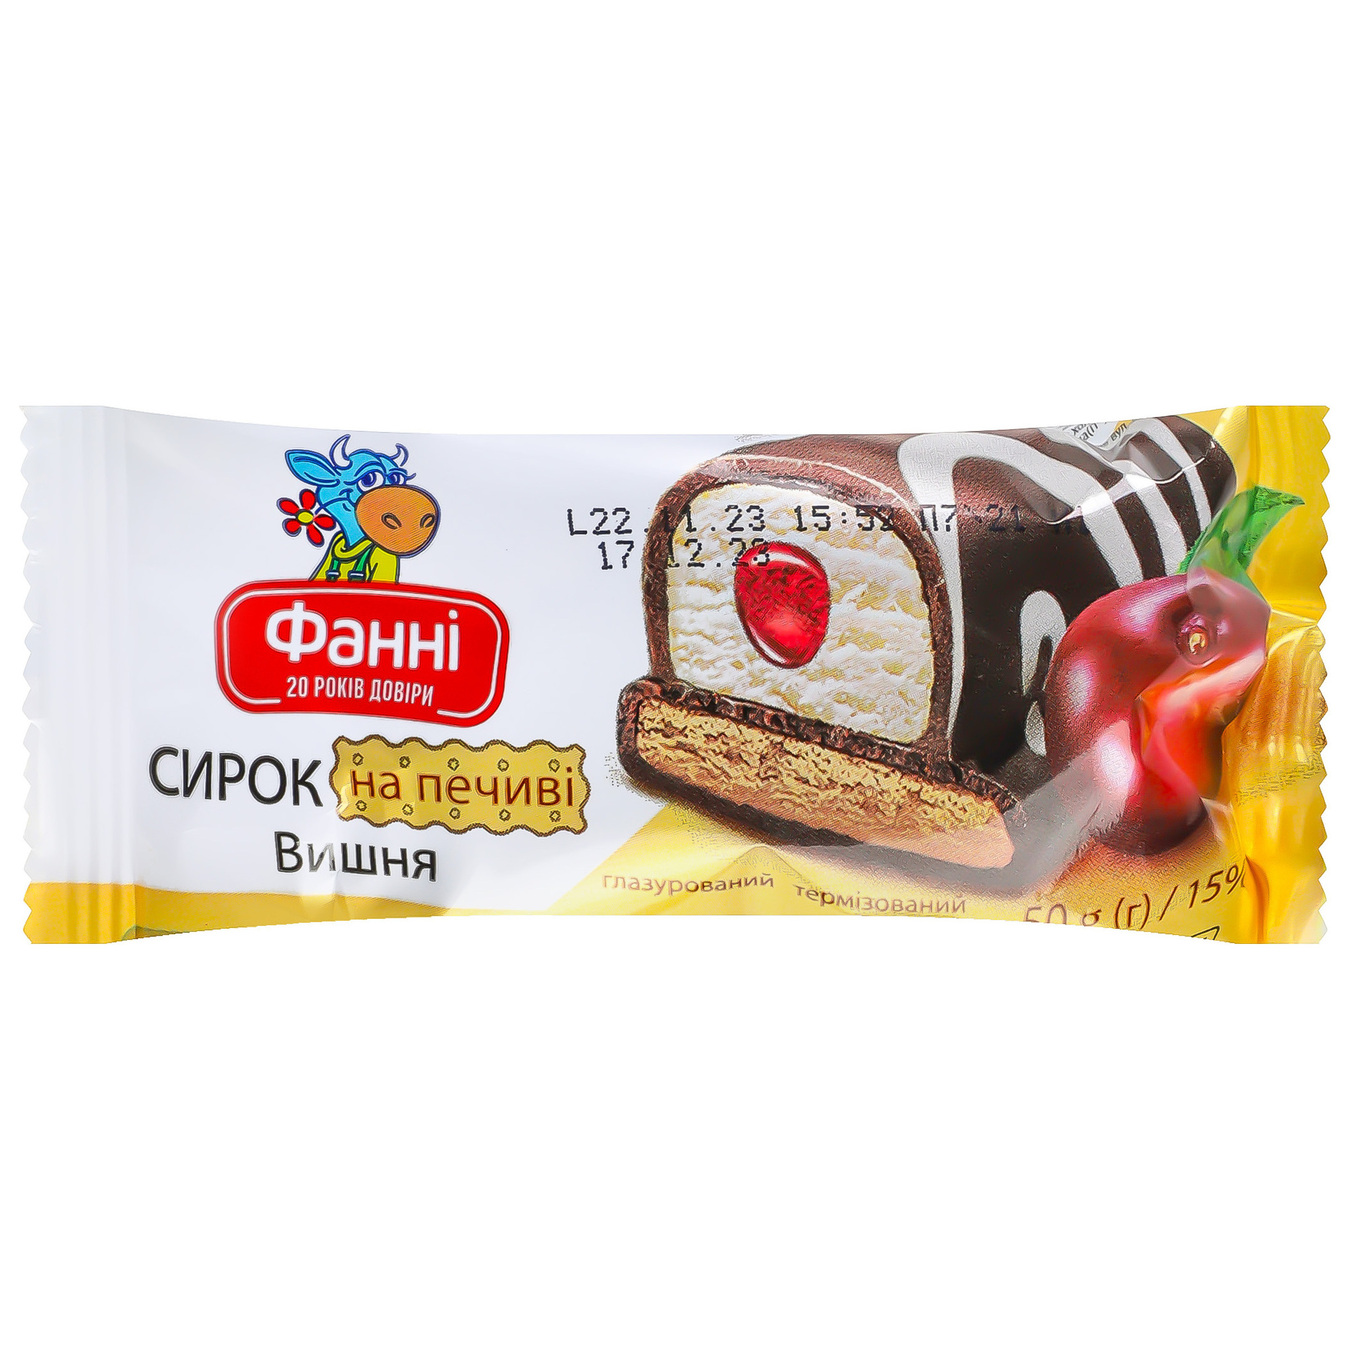 Fanni Cherry Cottage Cheese in Chocolate Glaze on a Cookie 15% 50g